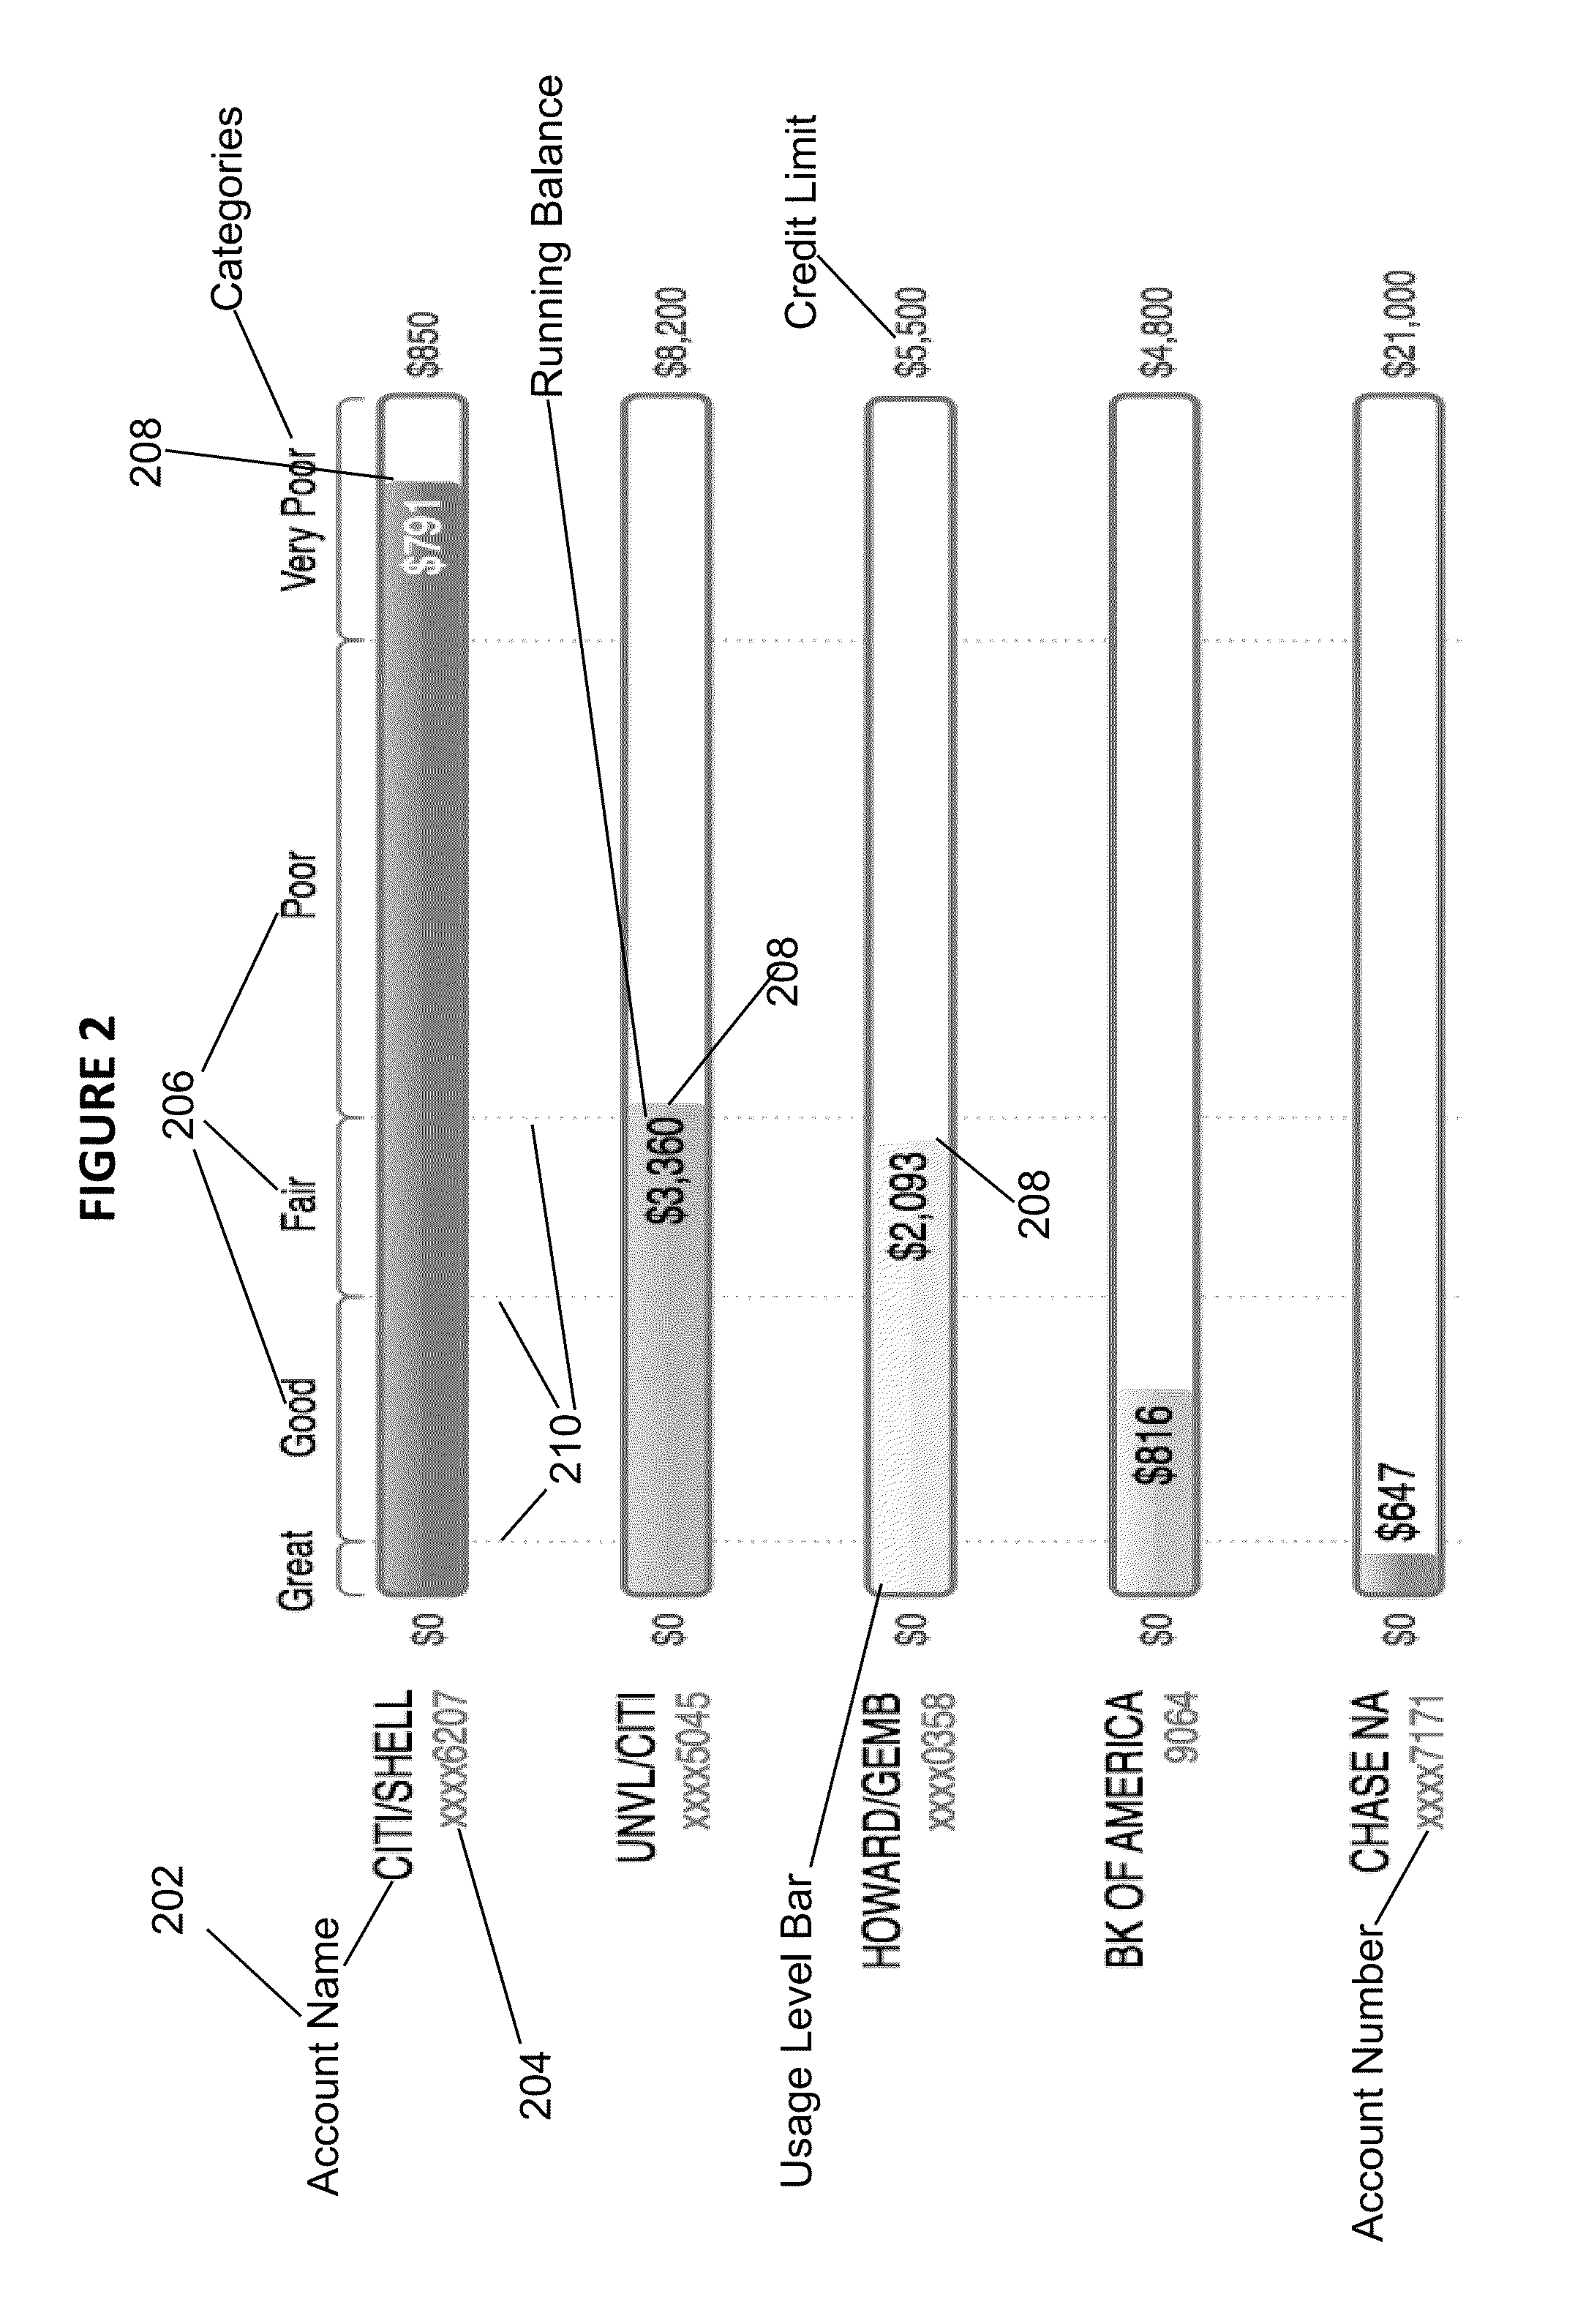 System and method for determination and reporting of credit use and impact on credit score